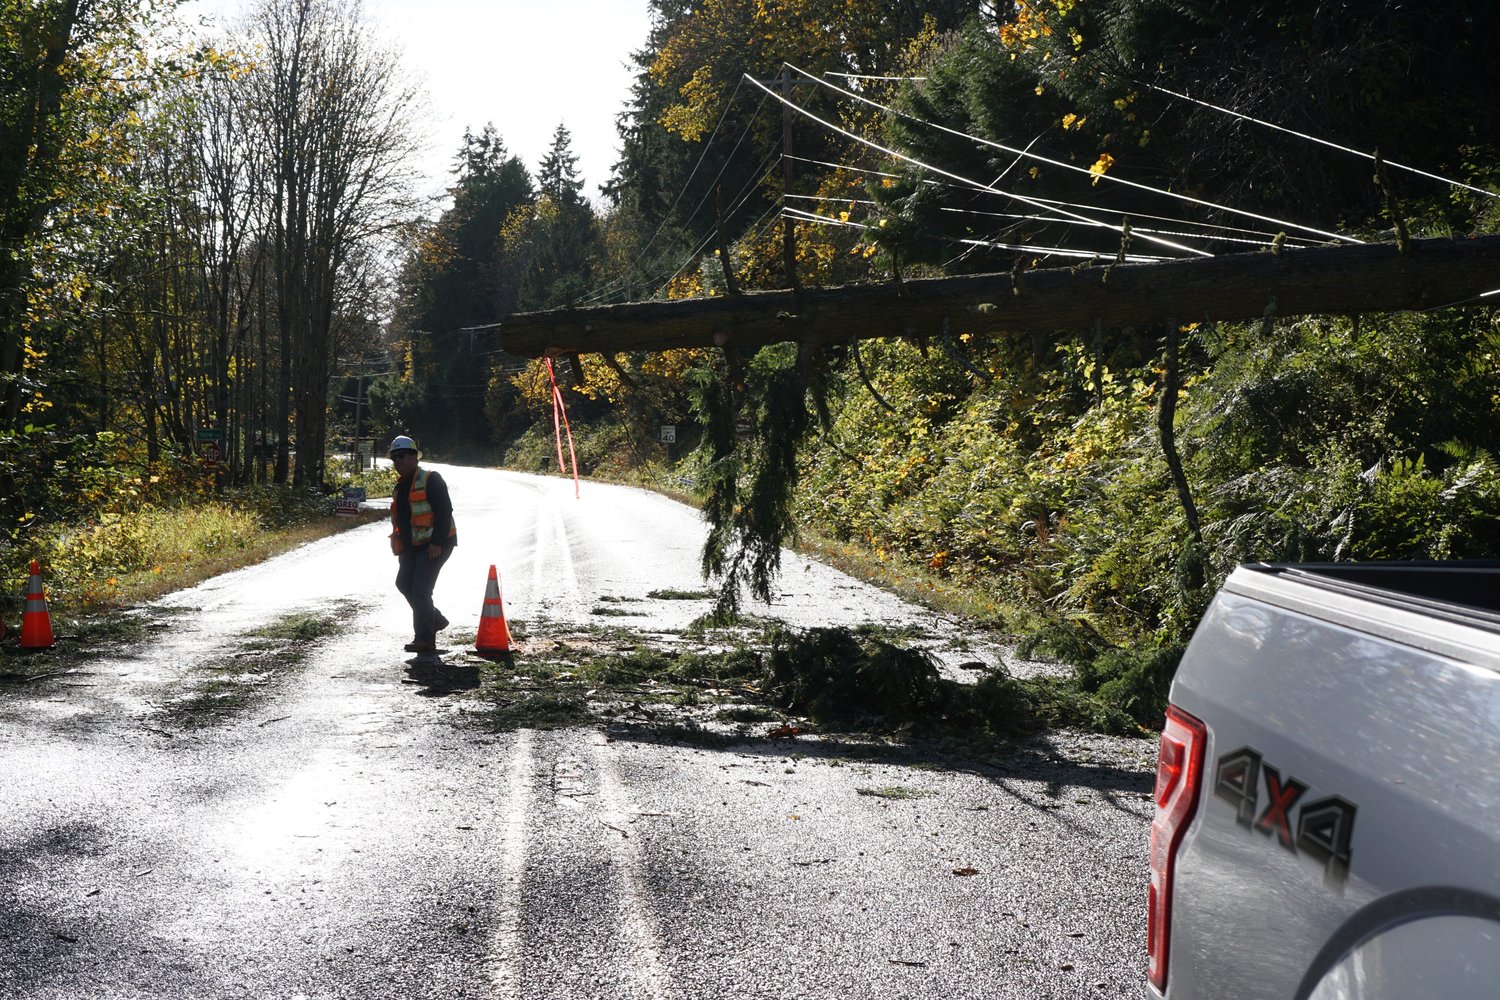 Crews from the Jefferson County PUD, Mason PUD, Palouse Power, and Olympic Electric Company worked together for around four days to fully restore electricity to customers in Jefferson County.